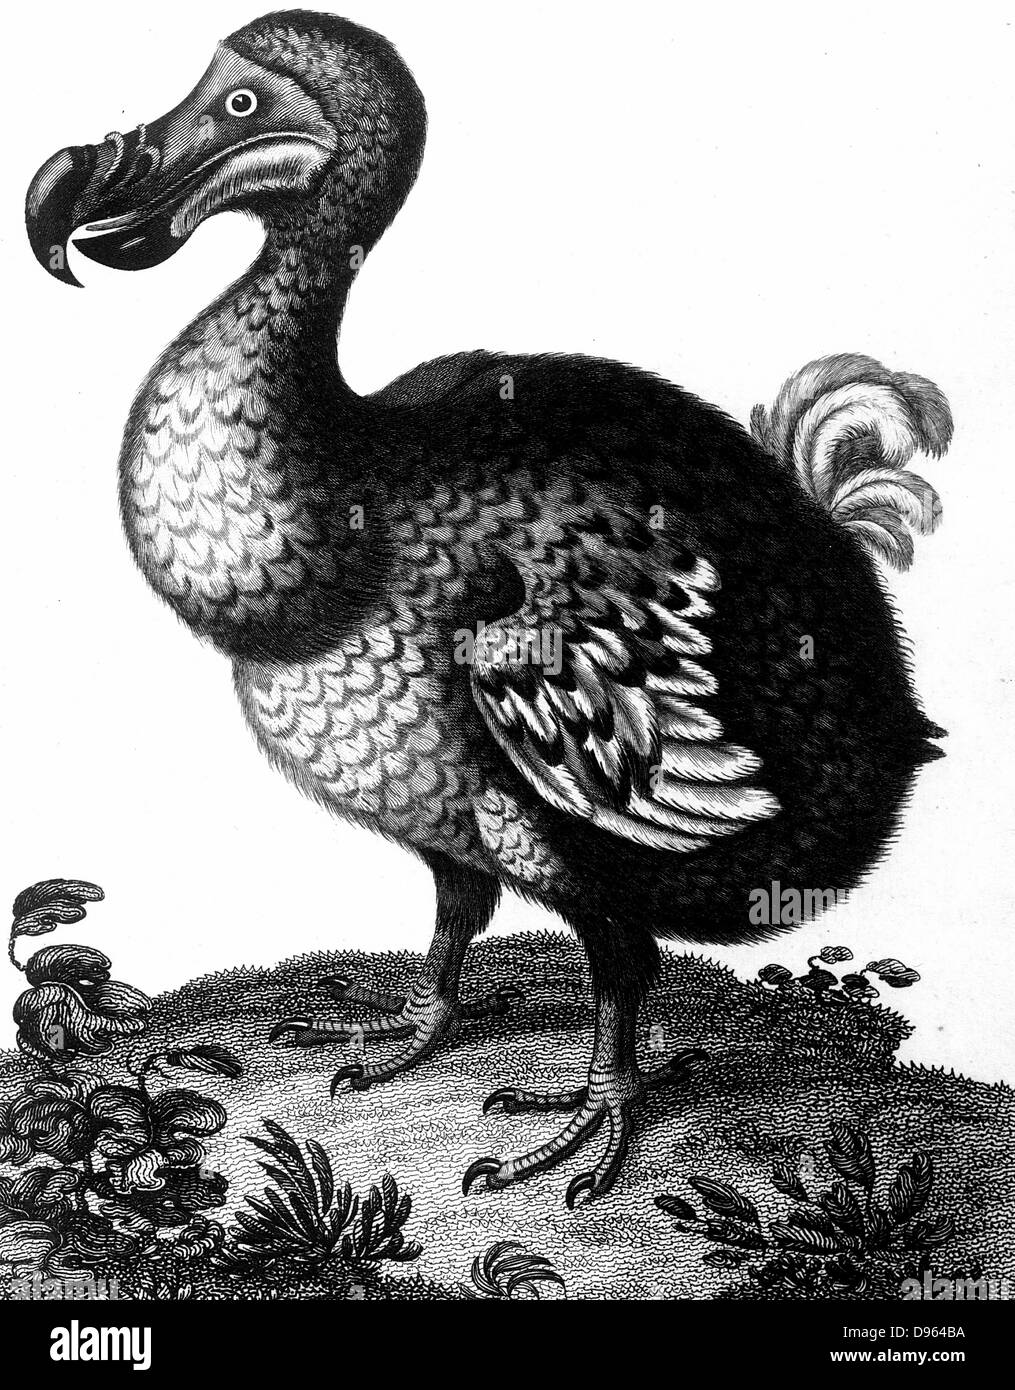 Dodo - Raphus cucullatus, formerly Didus ineptus - extinct flightless bird from Madagascar. First observed by Portuguese sailors in about 1507, by 1681 the Dodo was extinct due to a combination of circumstances including killing for food by men, introduction of animlas such as the rat, and destruction of habitat. Copperplate engraving 1804. Stock Photo